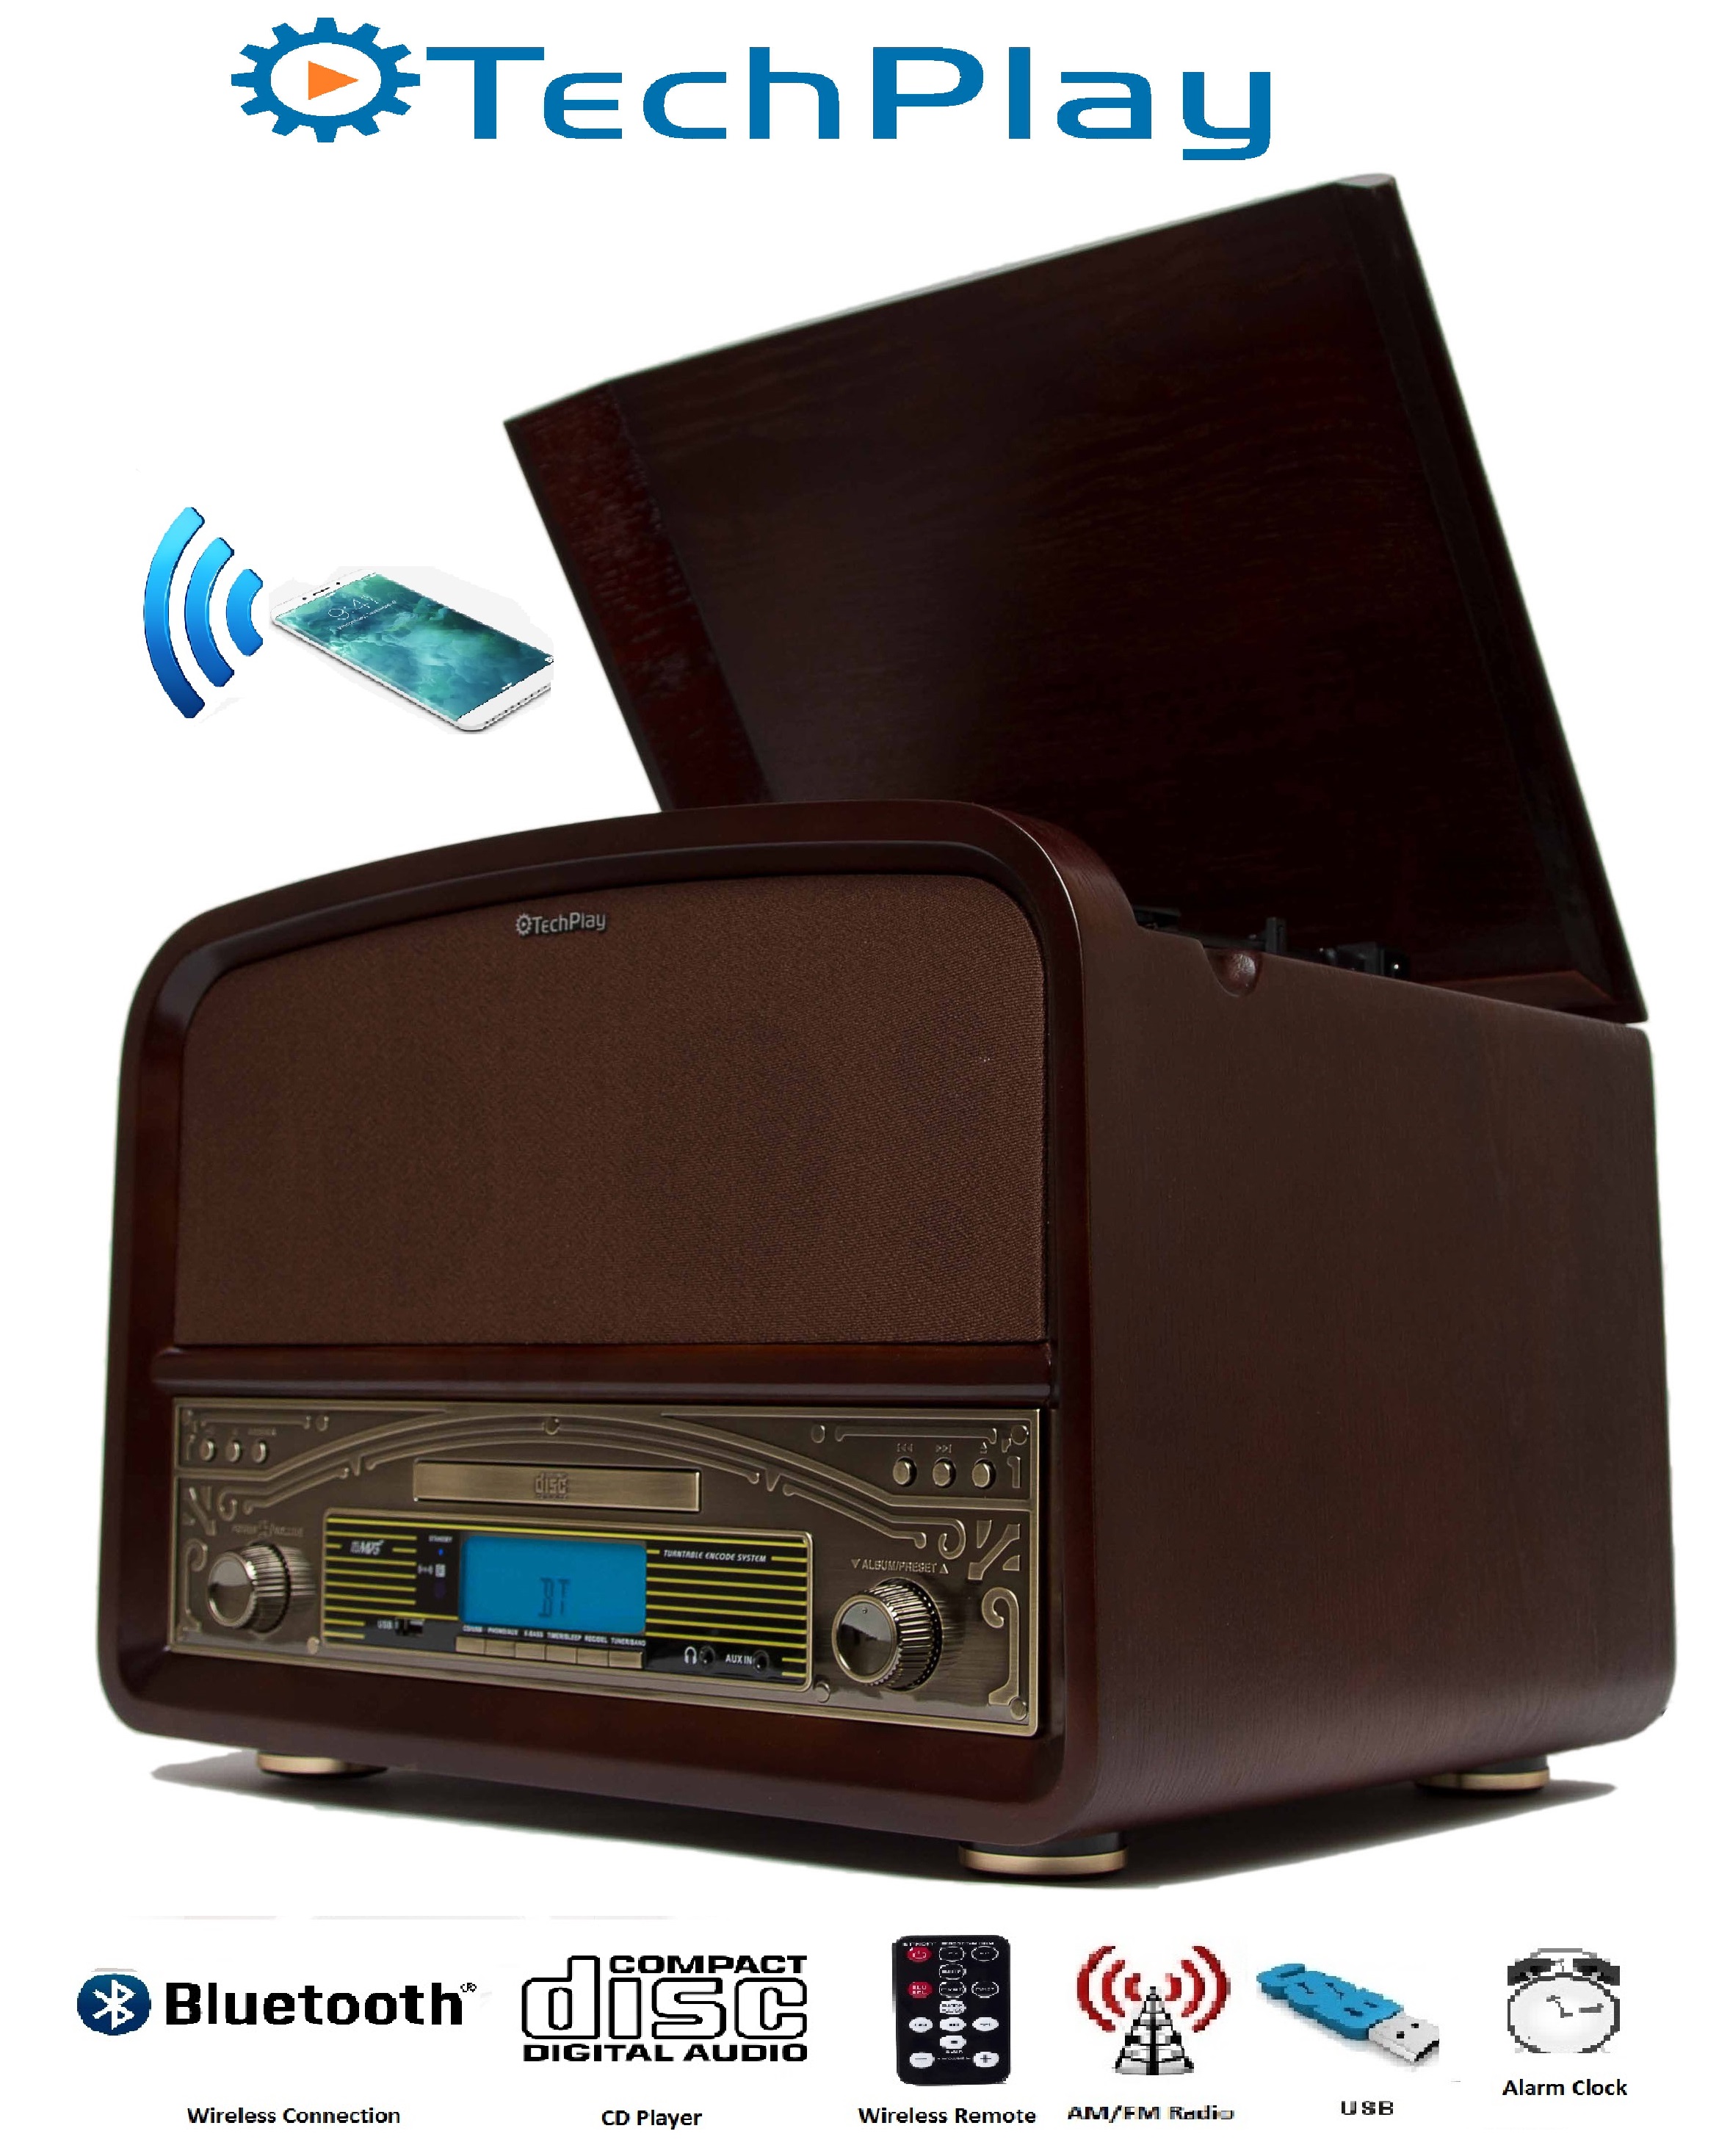 TechPlay TCP9560, High Power 20W Retro Wooden 3 Speed Bluetooth Turntable, with CD Player, AM/FM Radio, USB Recording and Playback with Remote Control(Walnut) - image 1 of 4